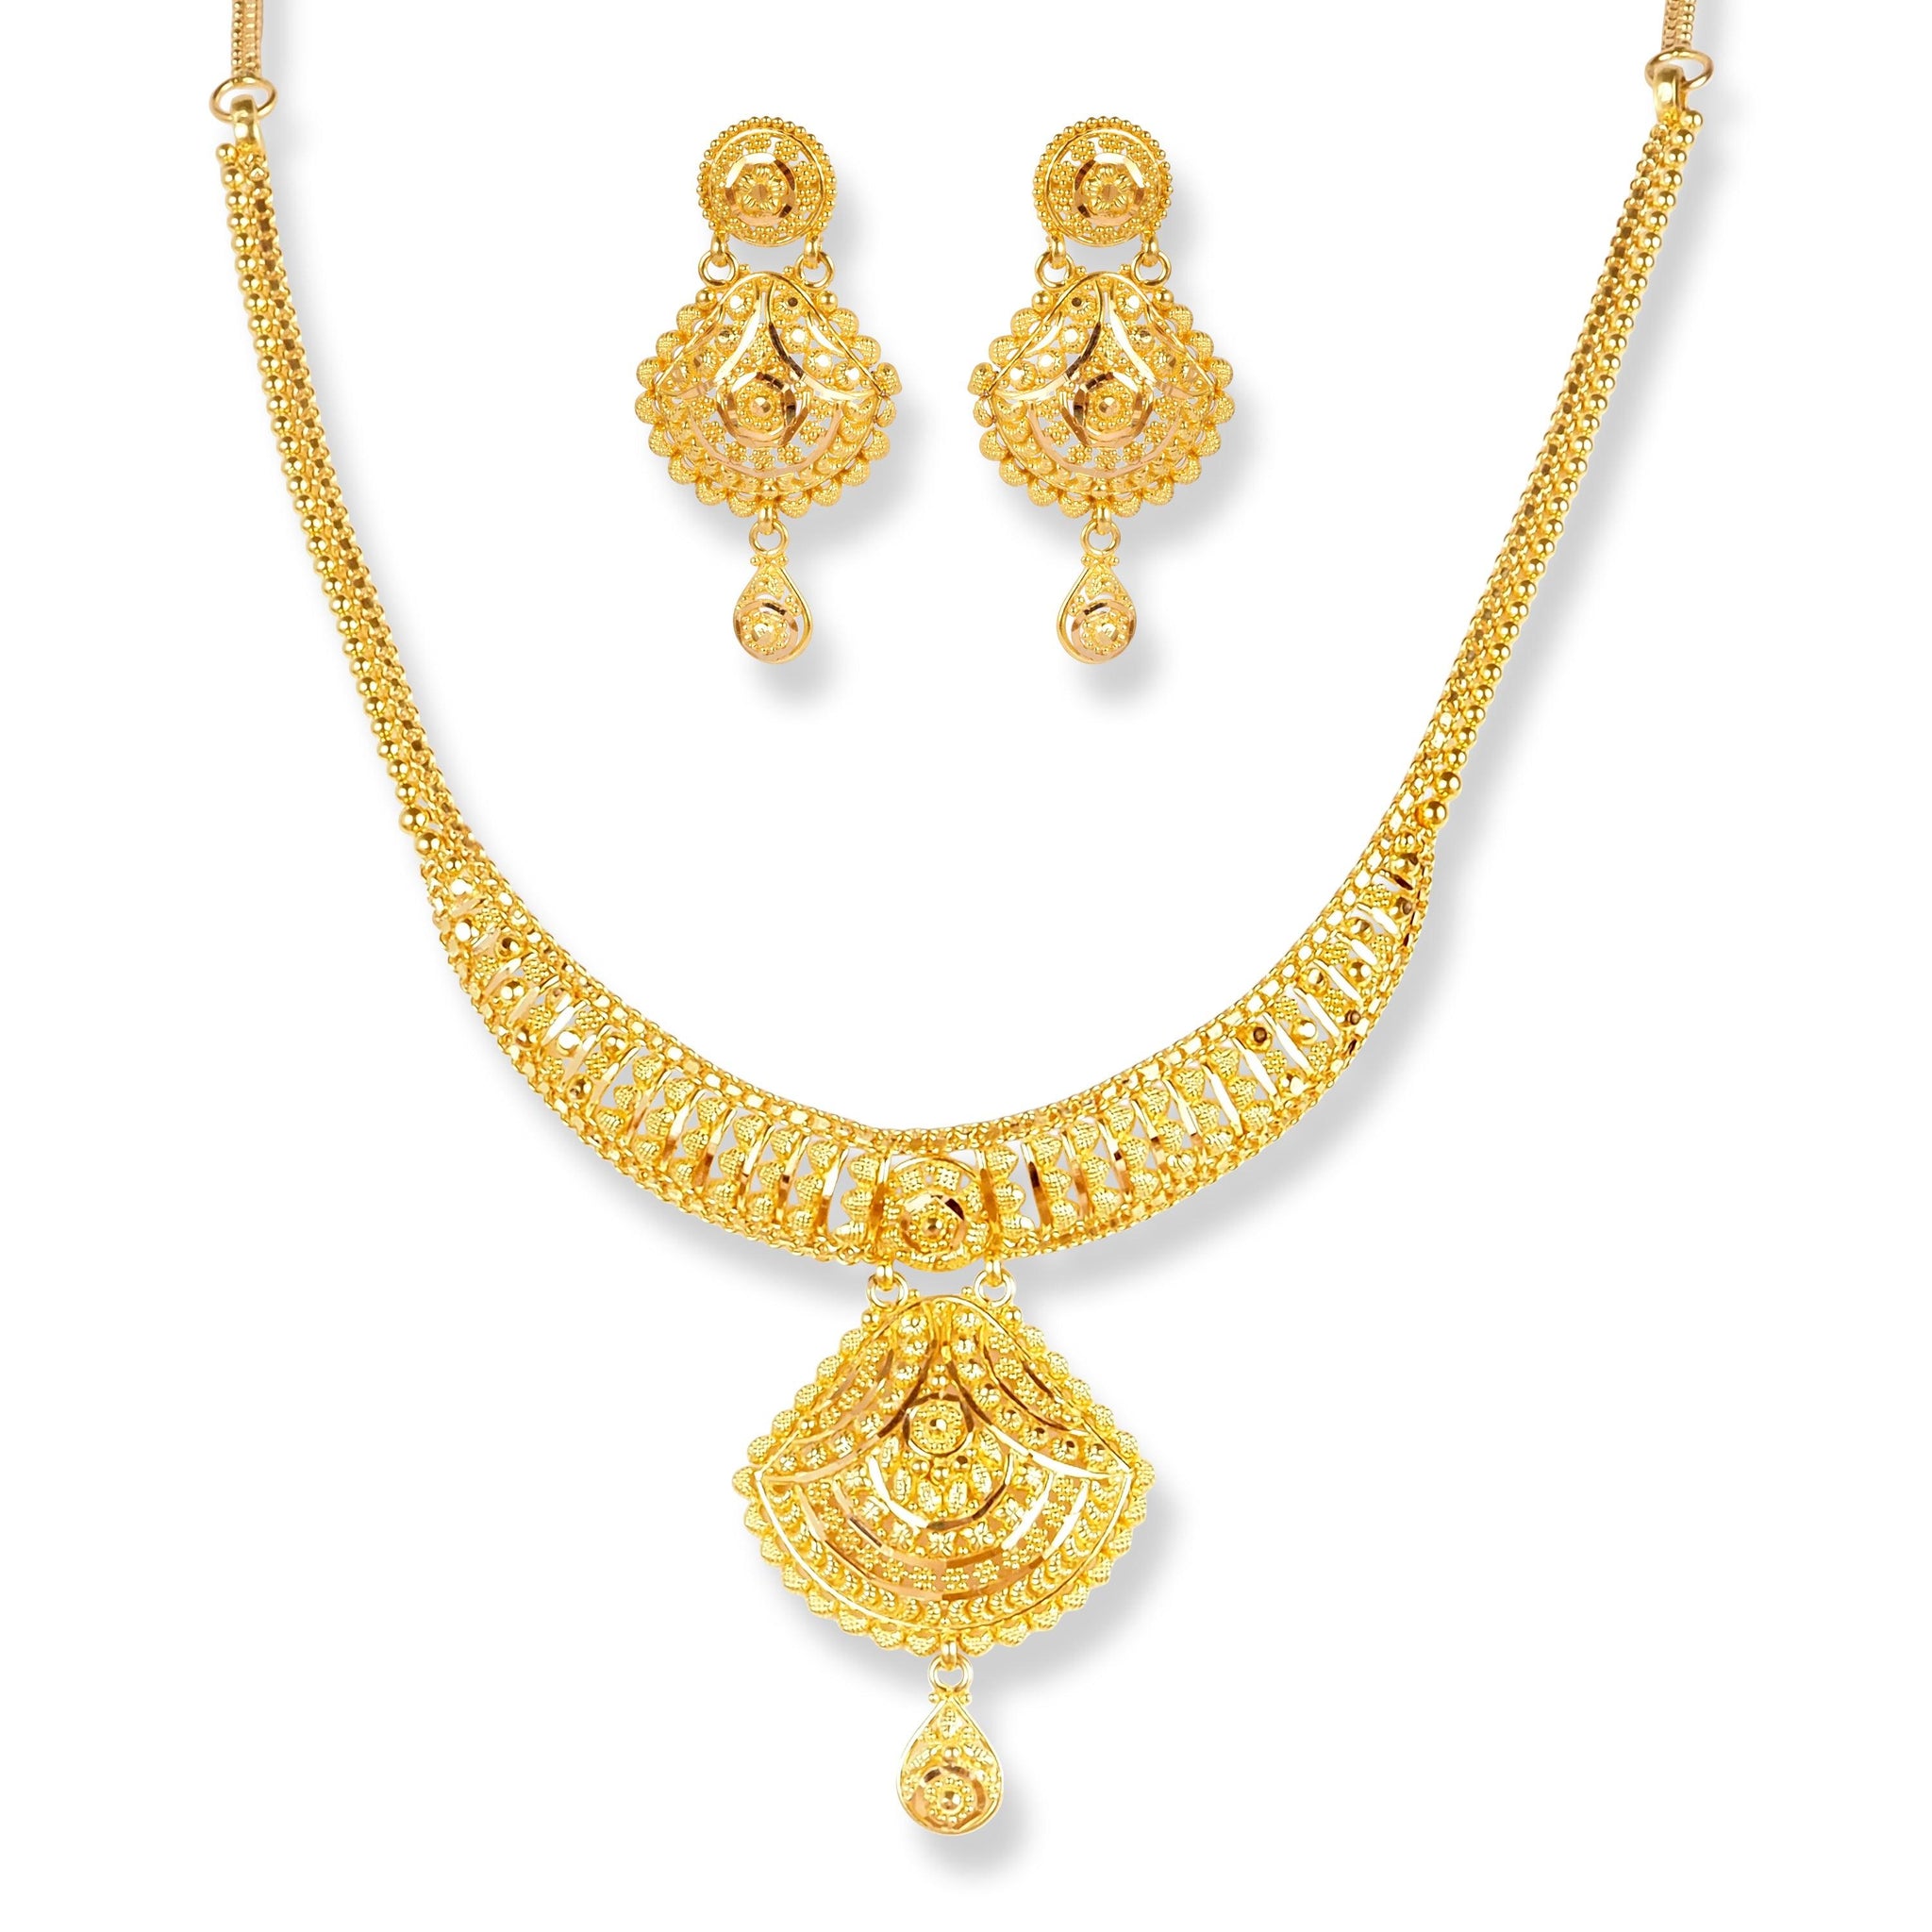 22ct Gold Filigree work Design Set with Beaded Drops N-7928